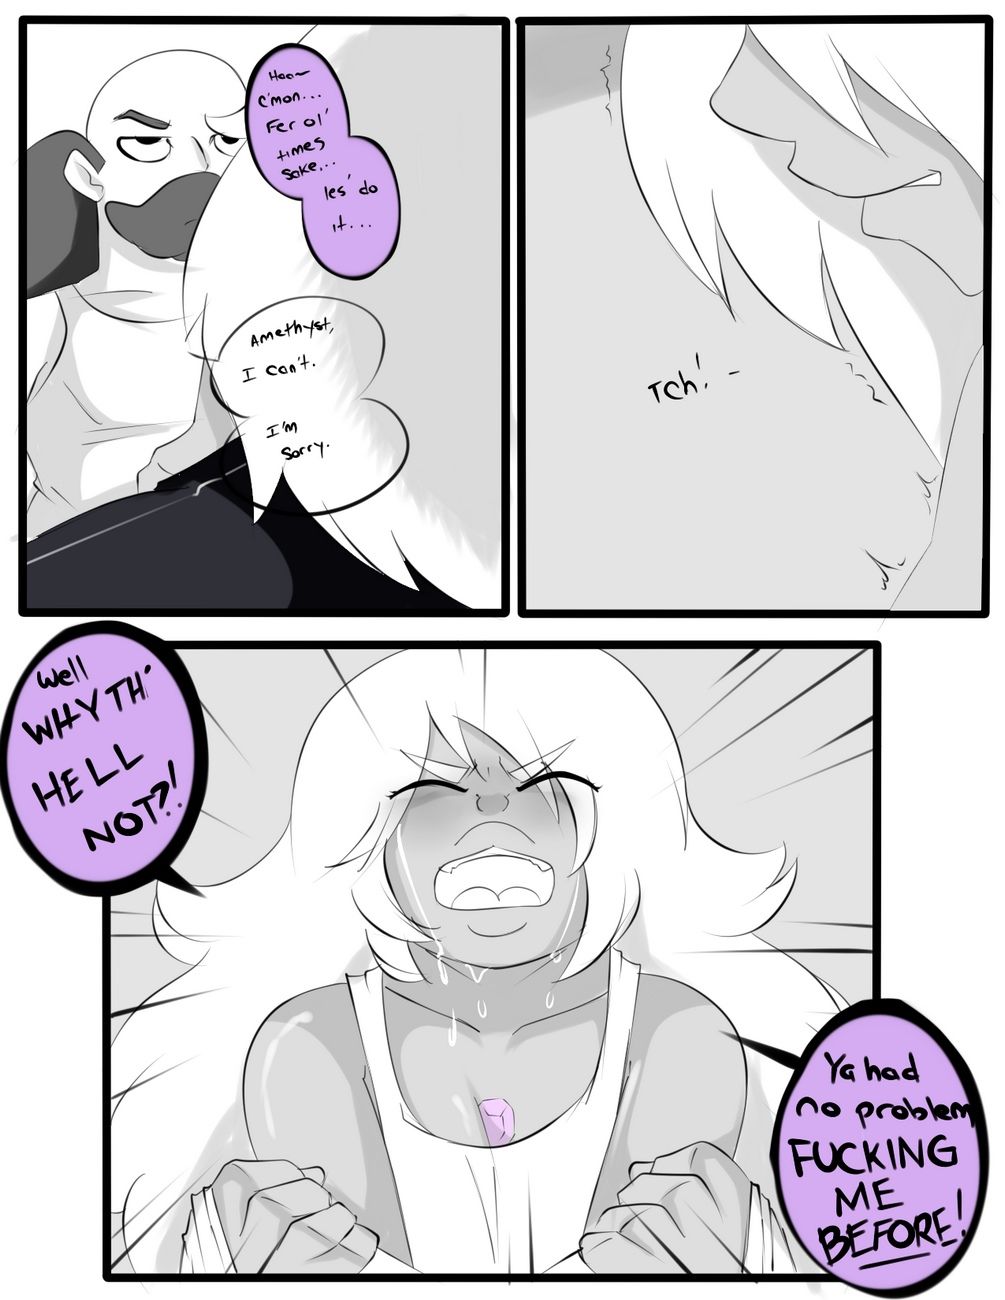 Amethysts Drinking Problem page 1